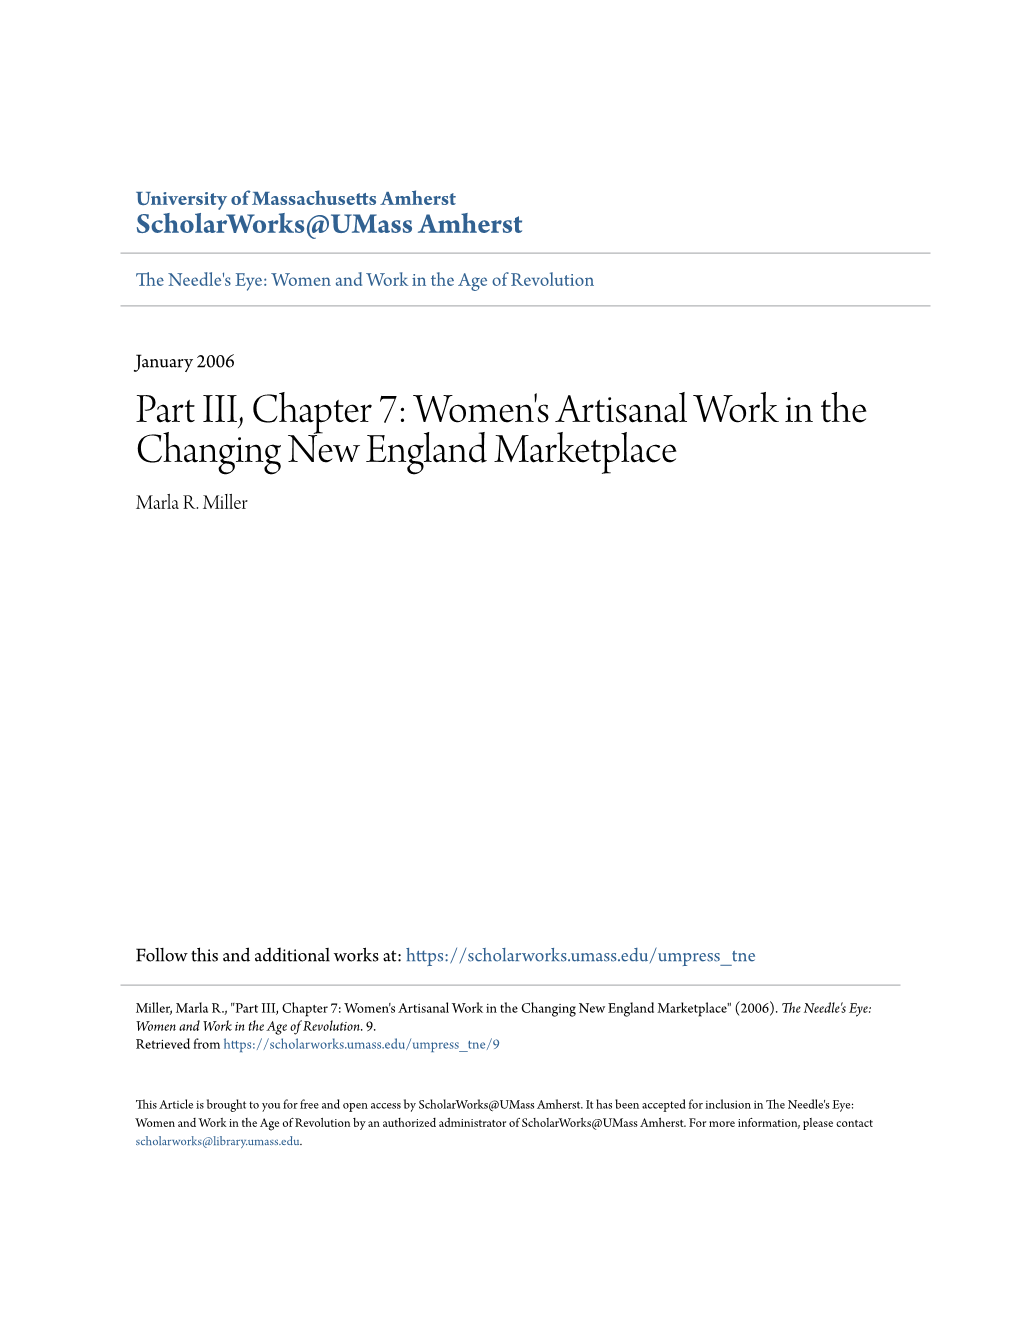 Part III, Chapter 7: Women's Artisanal Work in the Changing New England Marketplace Marla R